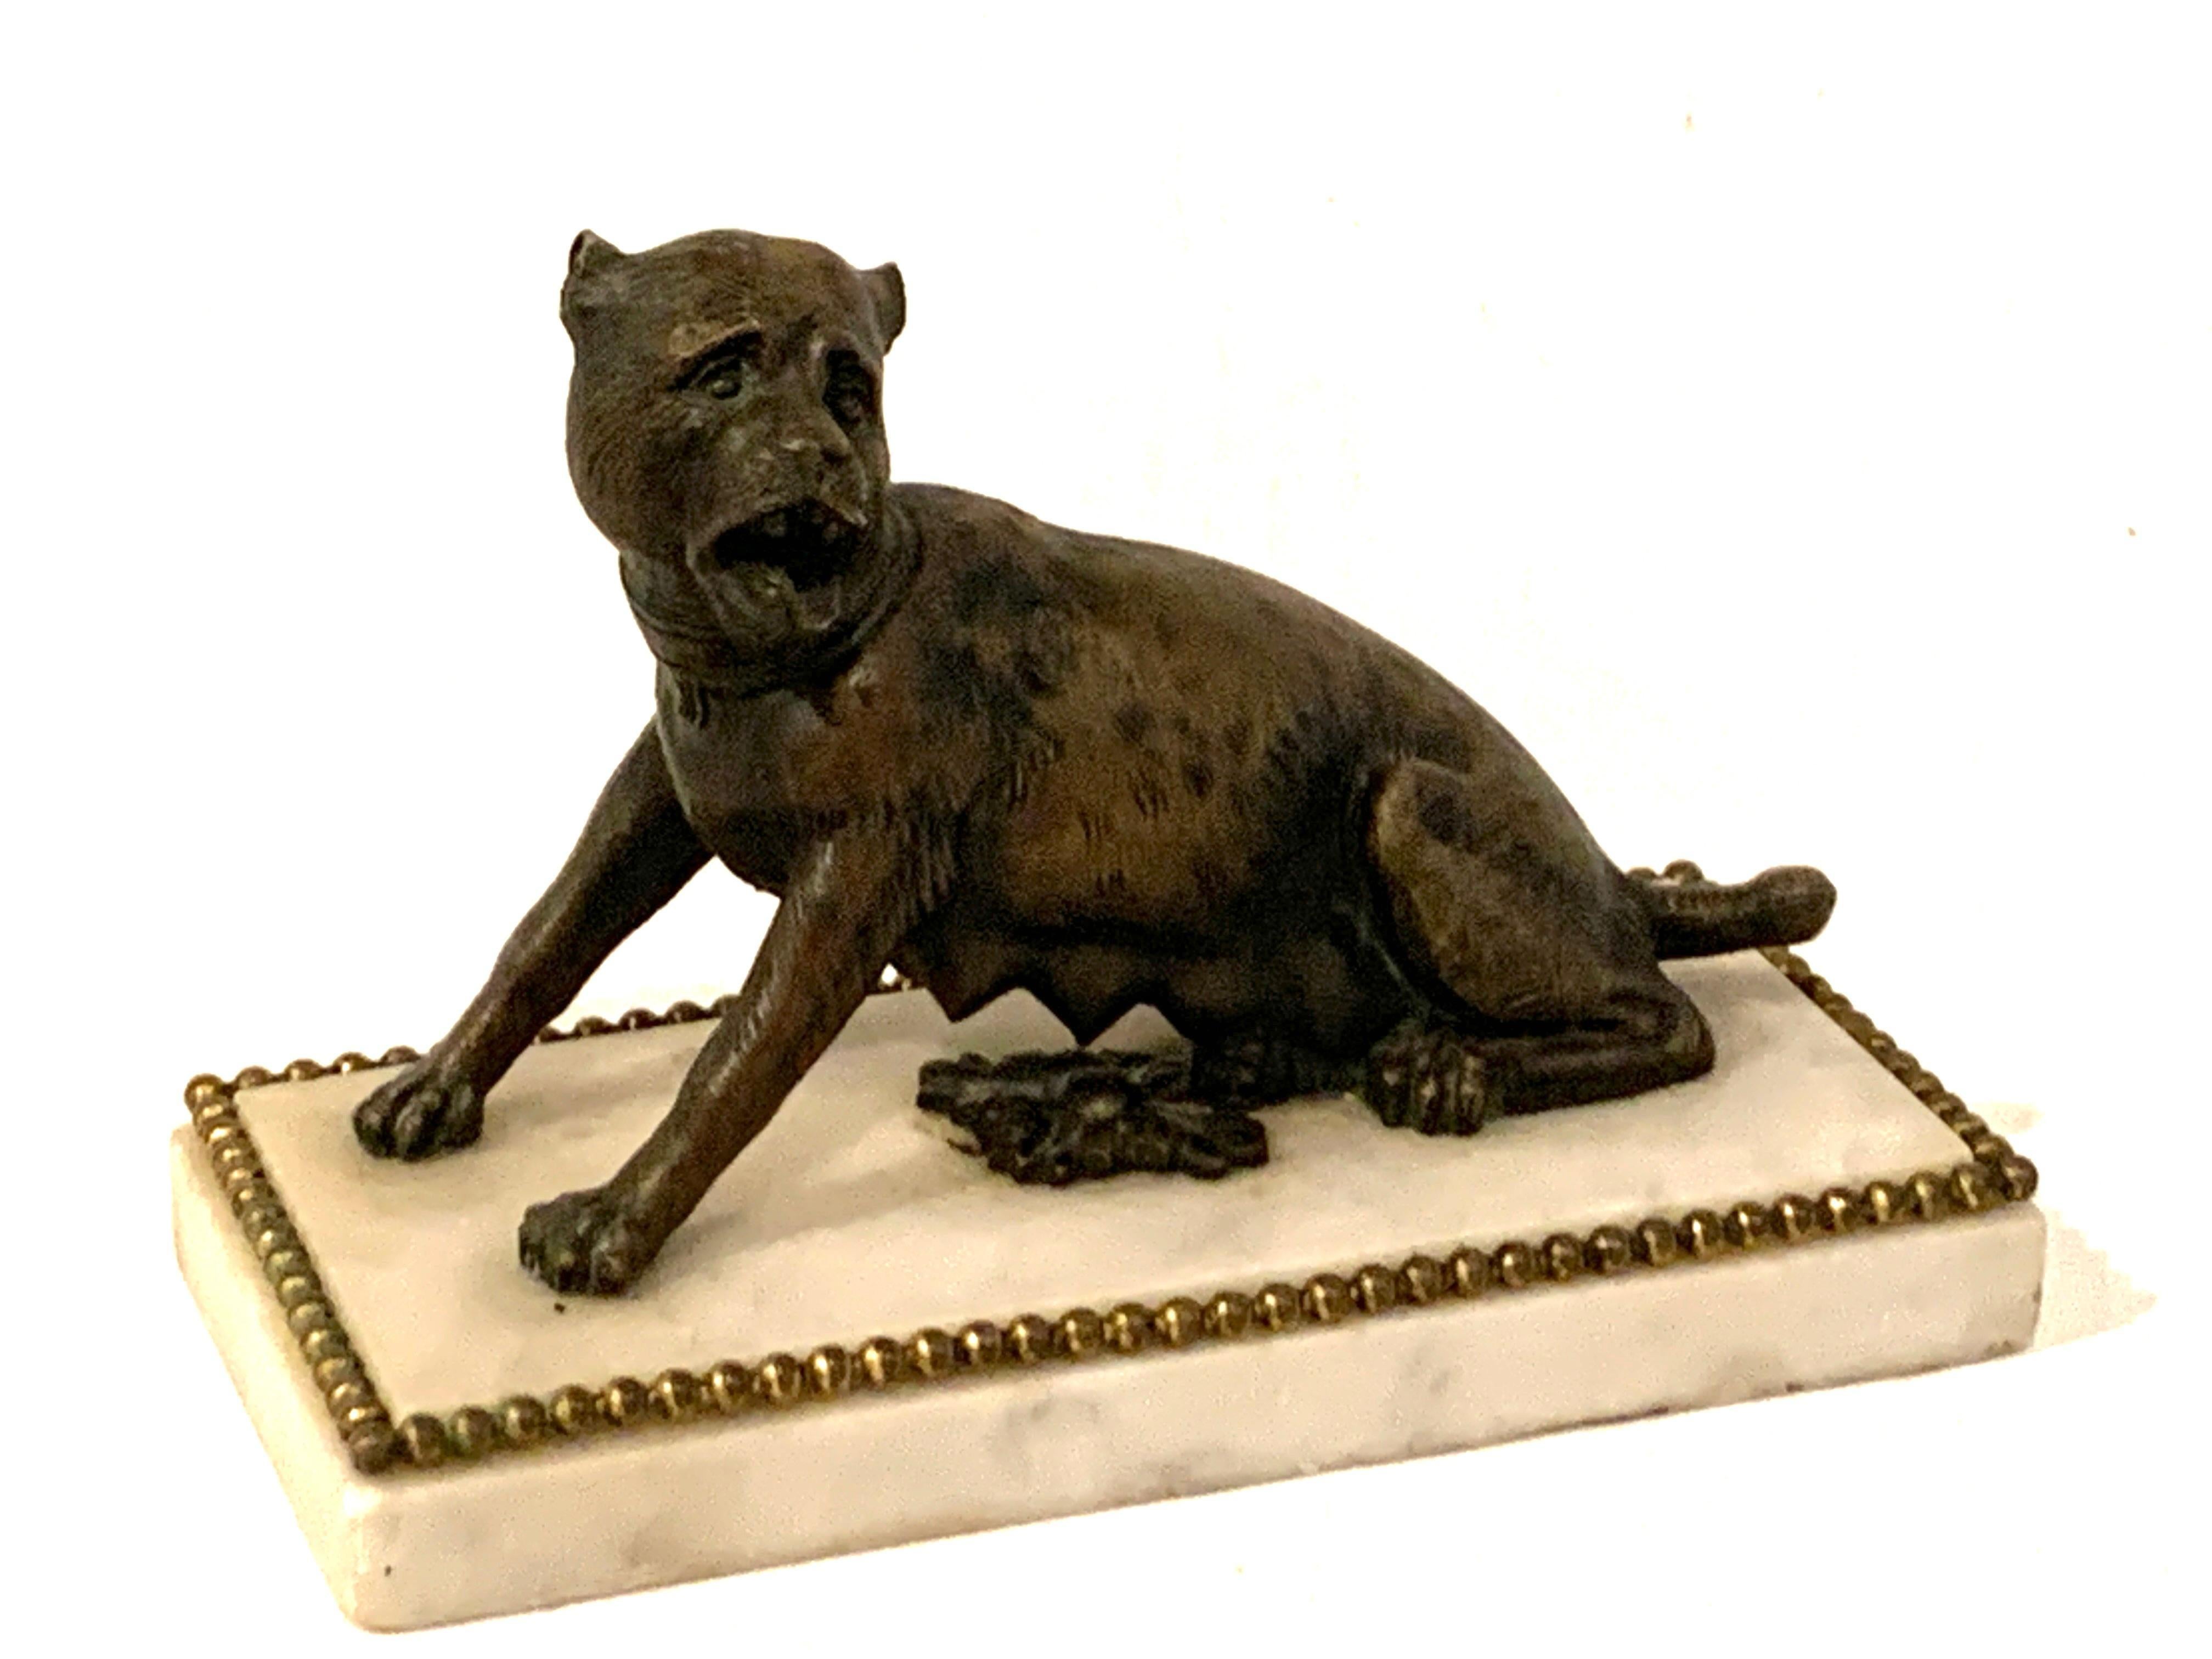 18th-19th century Italian bronze sculpture of a seated she-Wolf, similar to the Capitoline Wolf /Lupa Capitolina without, Romulus and Remus, with two front paws raised, mounted on ormolu and Carrara marble base.